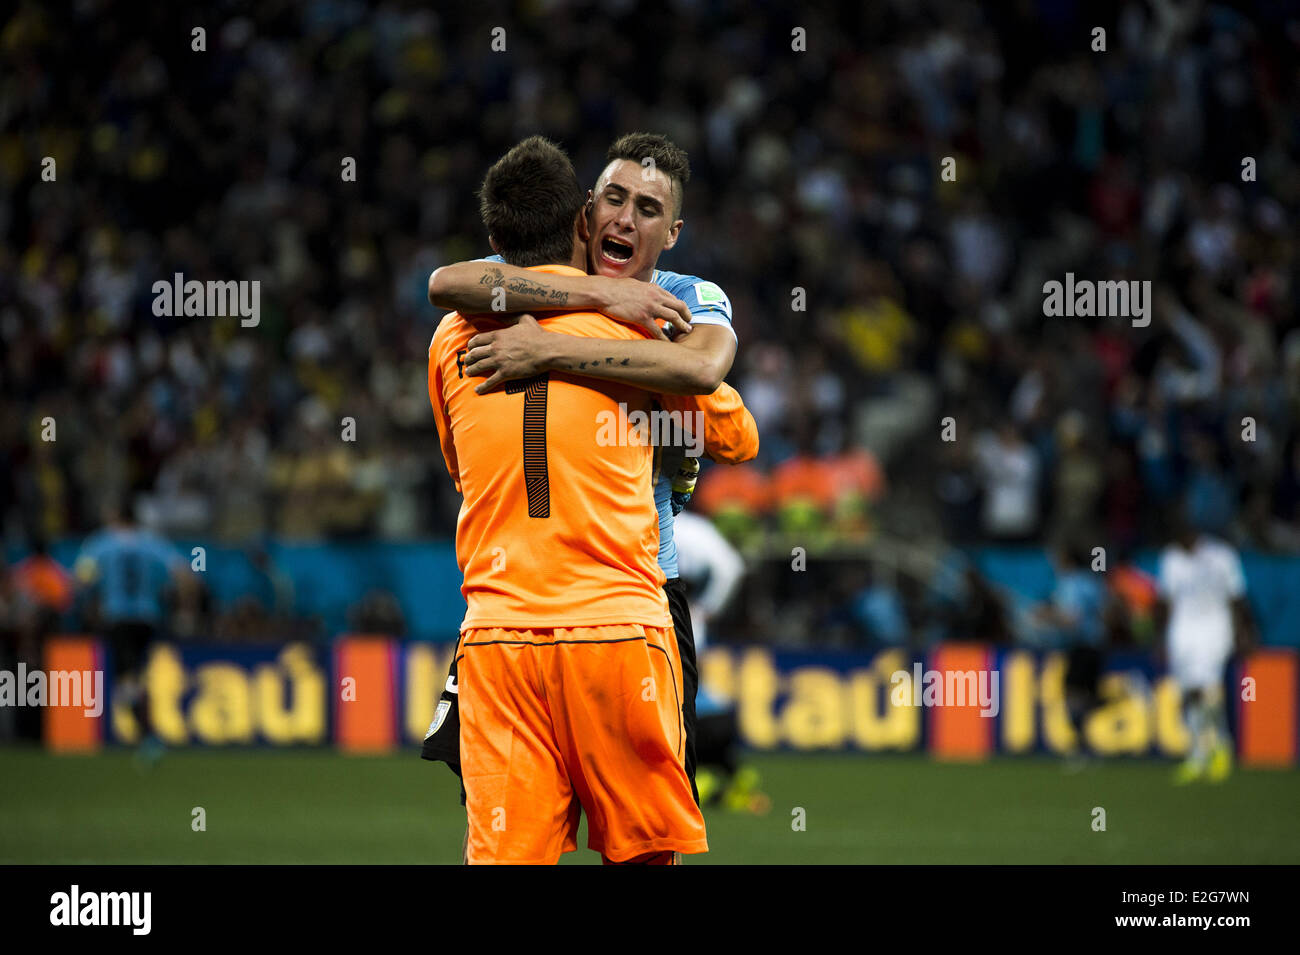 Sao Paolo, Brazil. 19th June, 2014. Fernando Muslera (1) e Jose Gimenez celebrate as Luis Suarez scores again, making it 2-1 for Uruguay at the match #23 of the 2014 World Cup, between England and Uruguay, this Thursday, June 19th, in Sao Paulo, Brasil Credit:  Gustavo Basso/NurPhoto/ZUMAPRESS.com/Alamy Live News Stock Photo